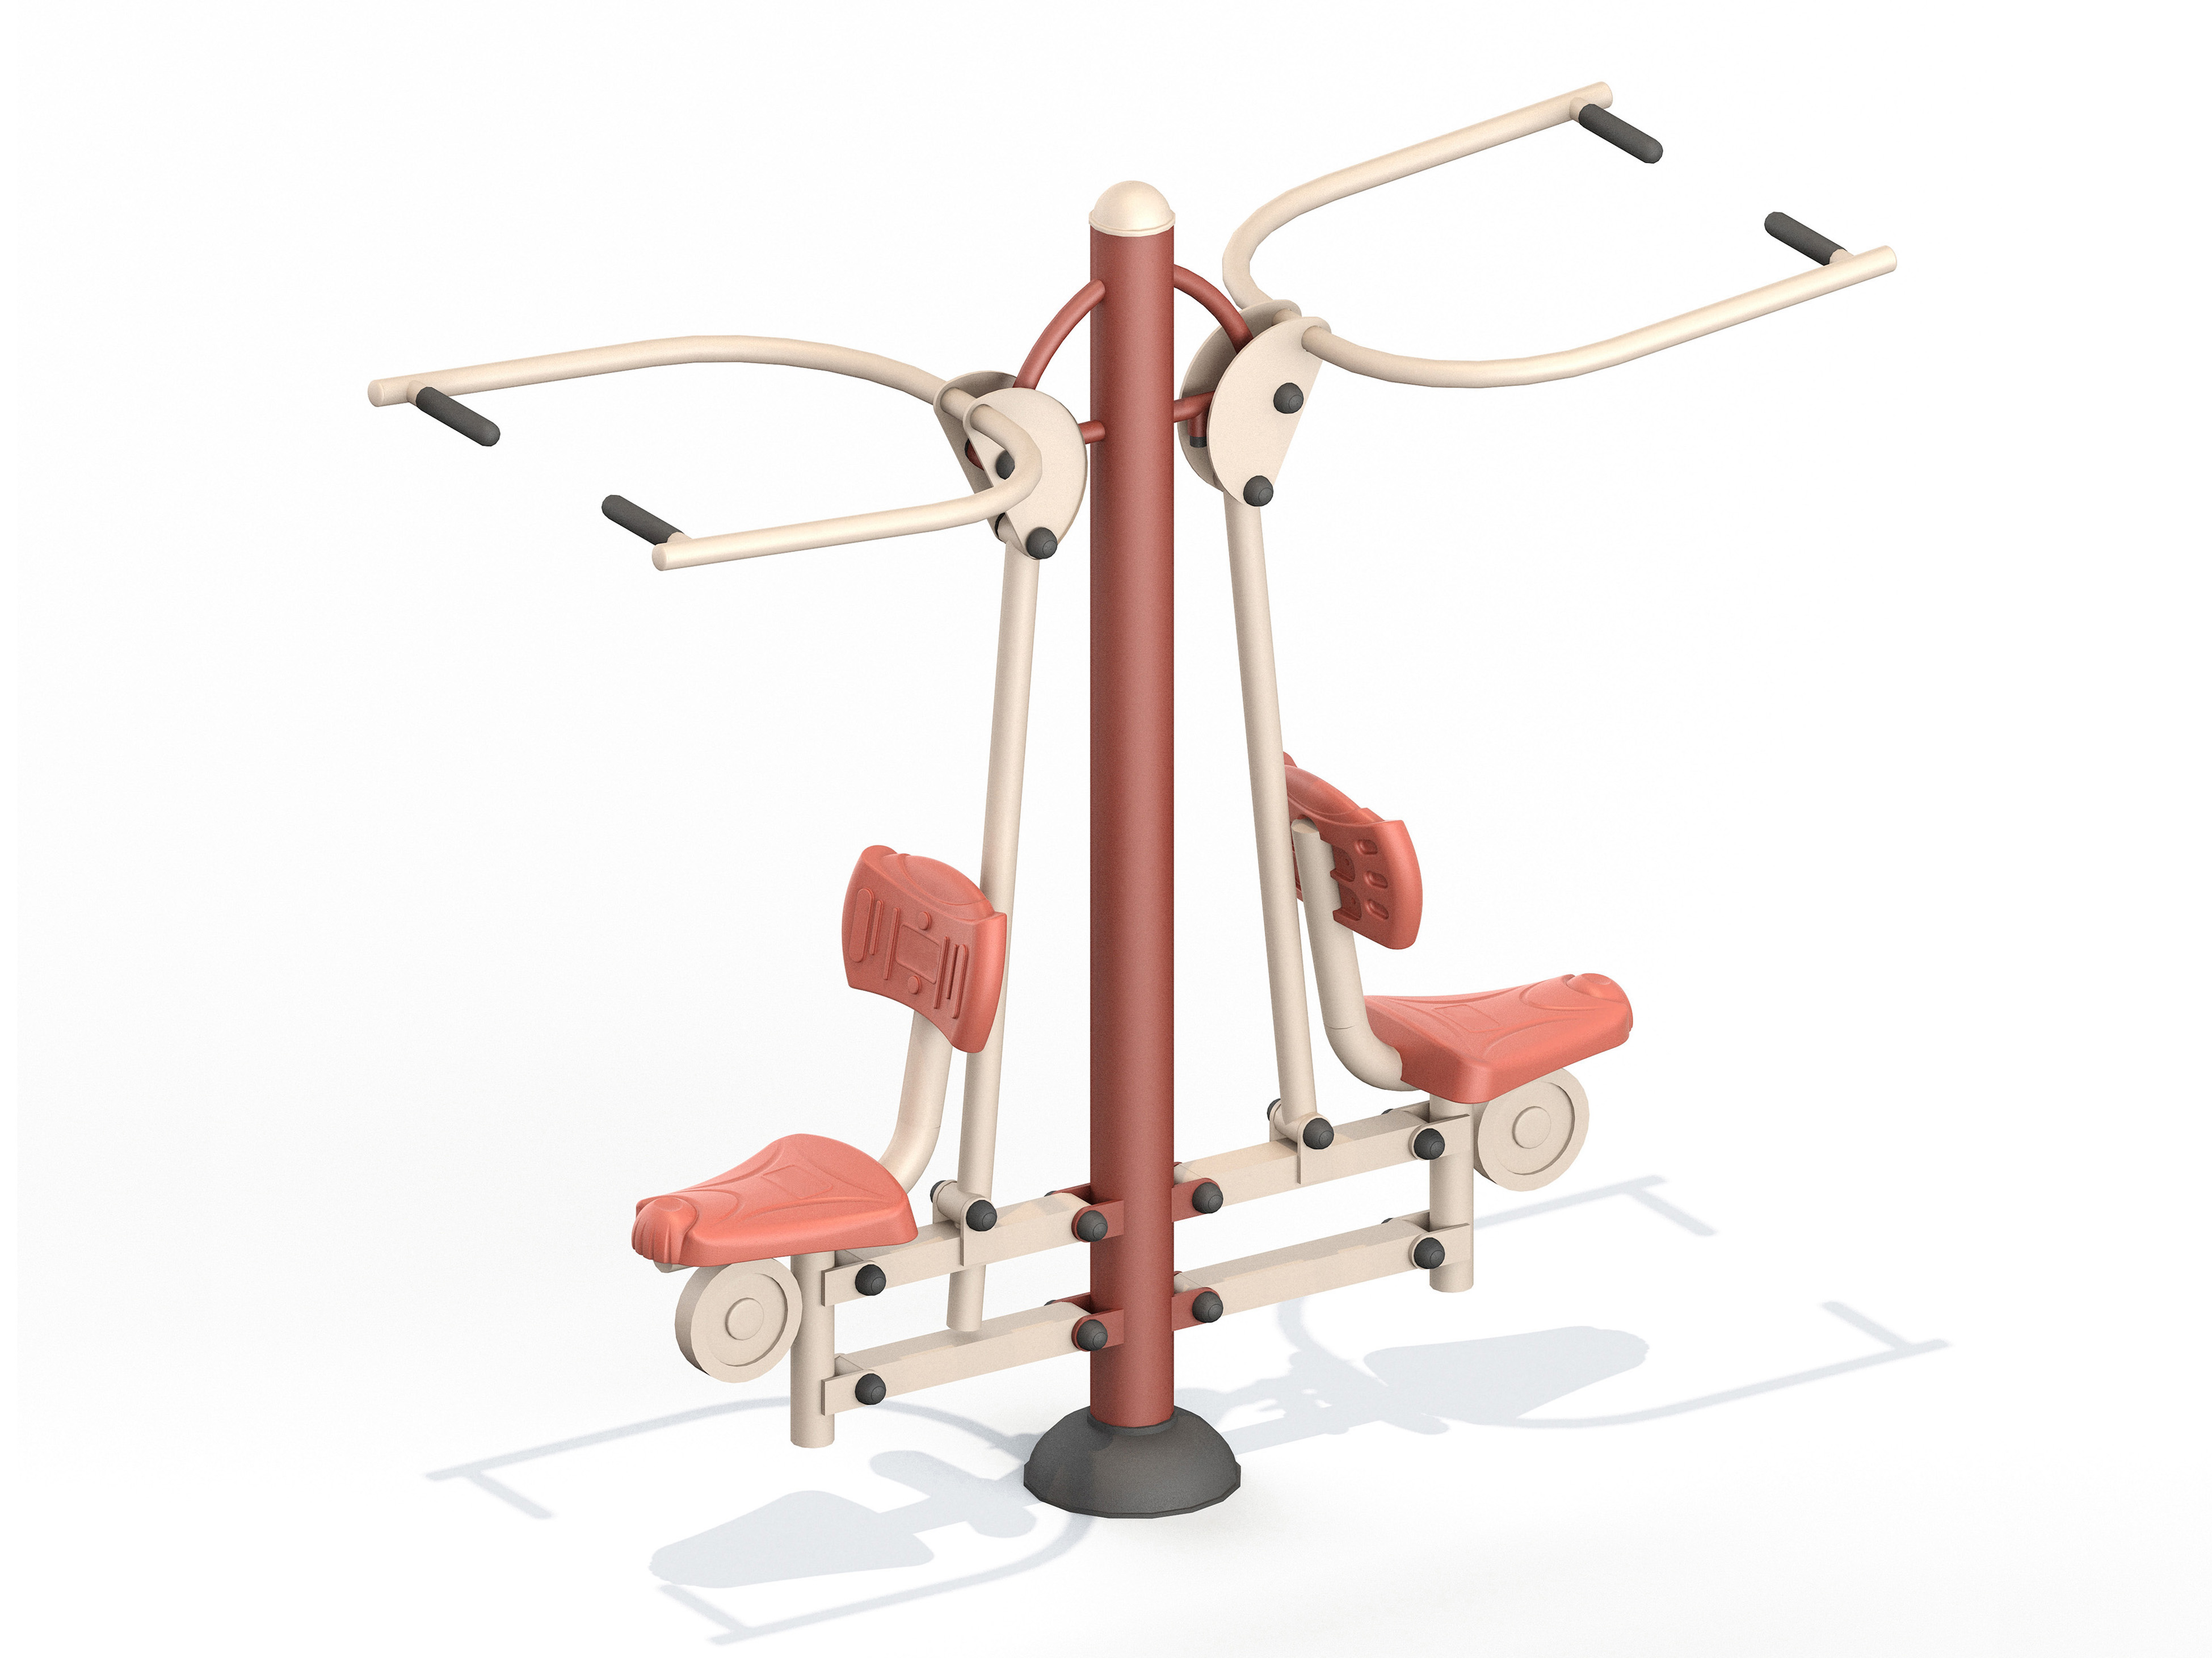  WR-002 Lat Pull Down 